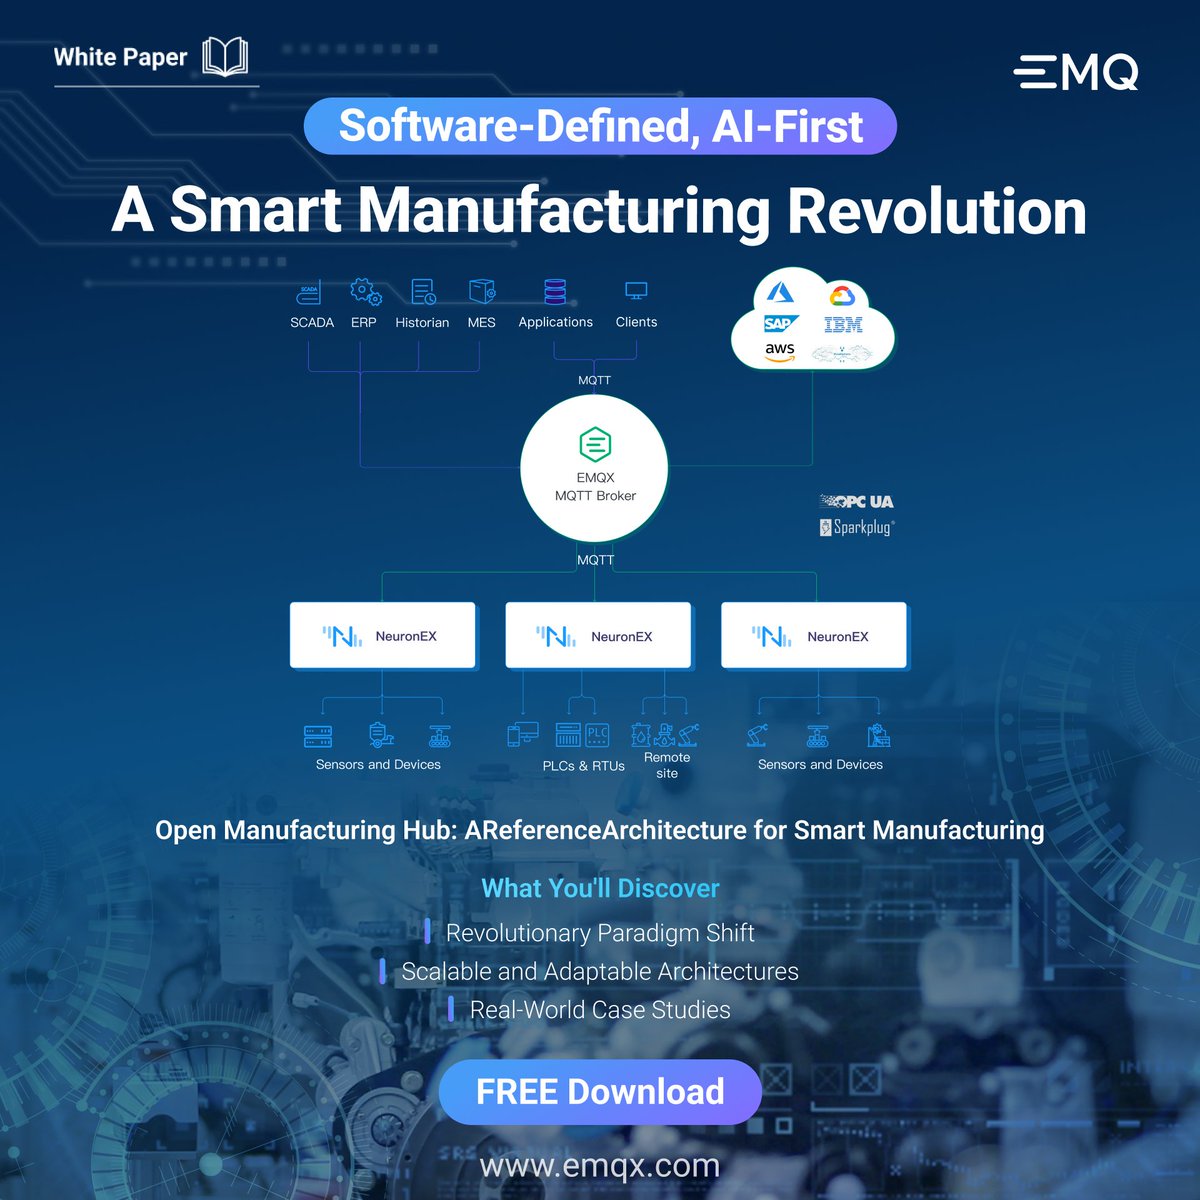 📖 Dive into the world of disruptive tech & innovation with our newest #whitepaper.

Explore the impact of Software-Defined Manufacturing & #AI-First approach, reshaping the manufacturing landscape. 🏭🤖️

🗝️ shorturl.at/gopFH

#SmartManufacturing social.emqx.com/u/4d6Vol